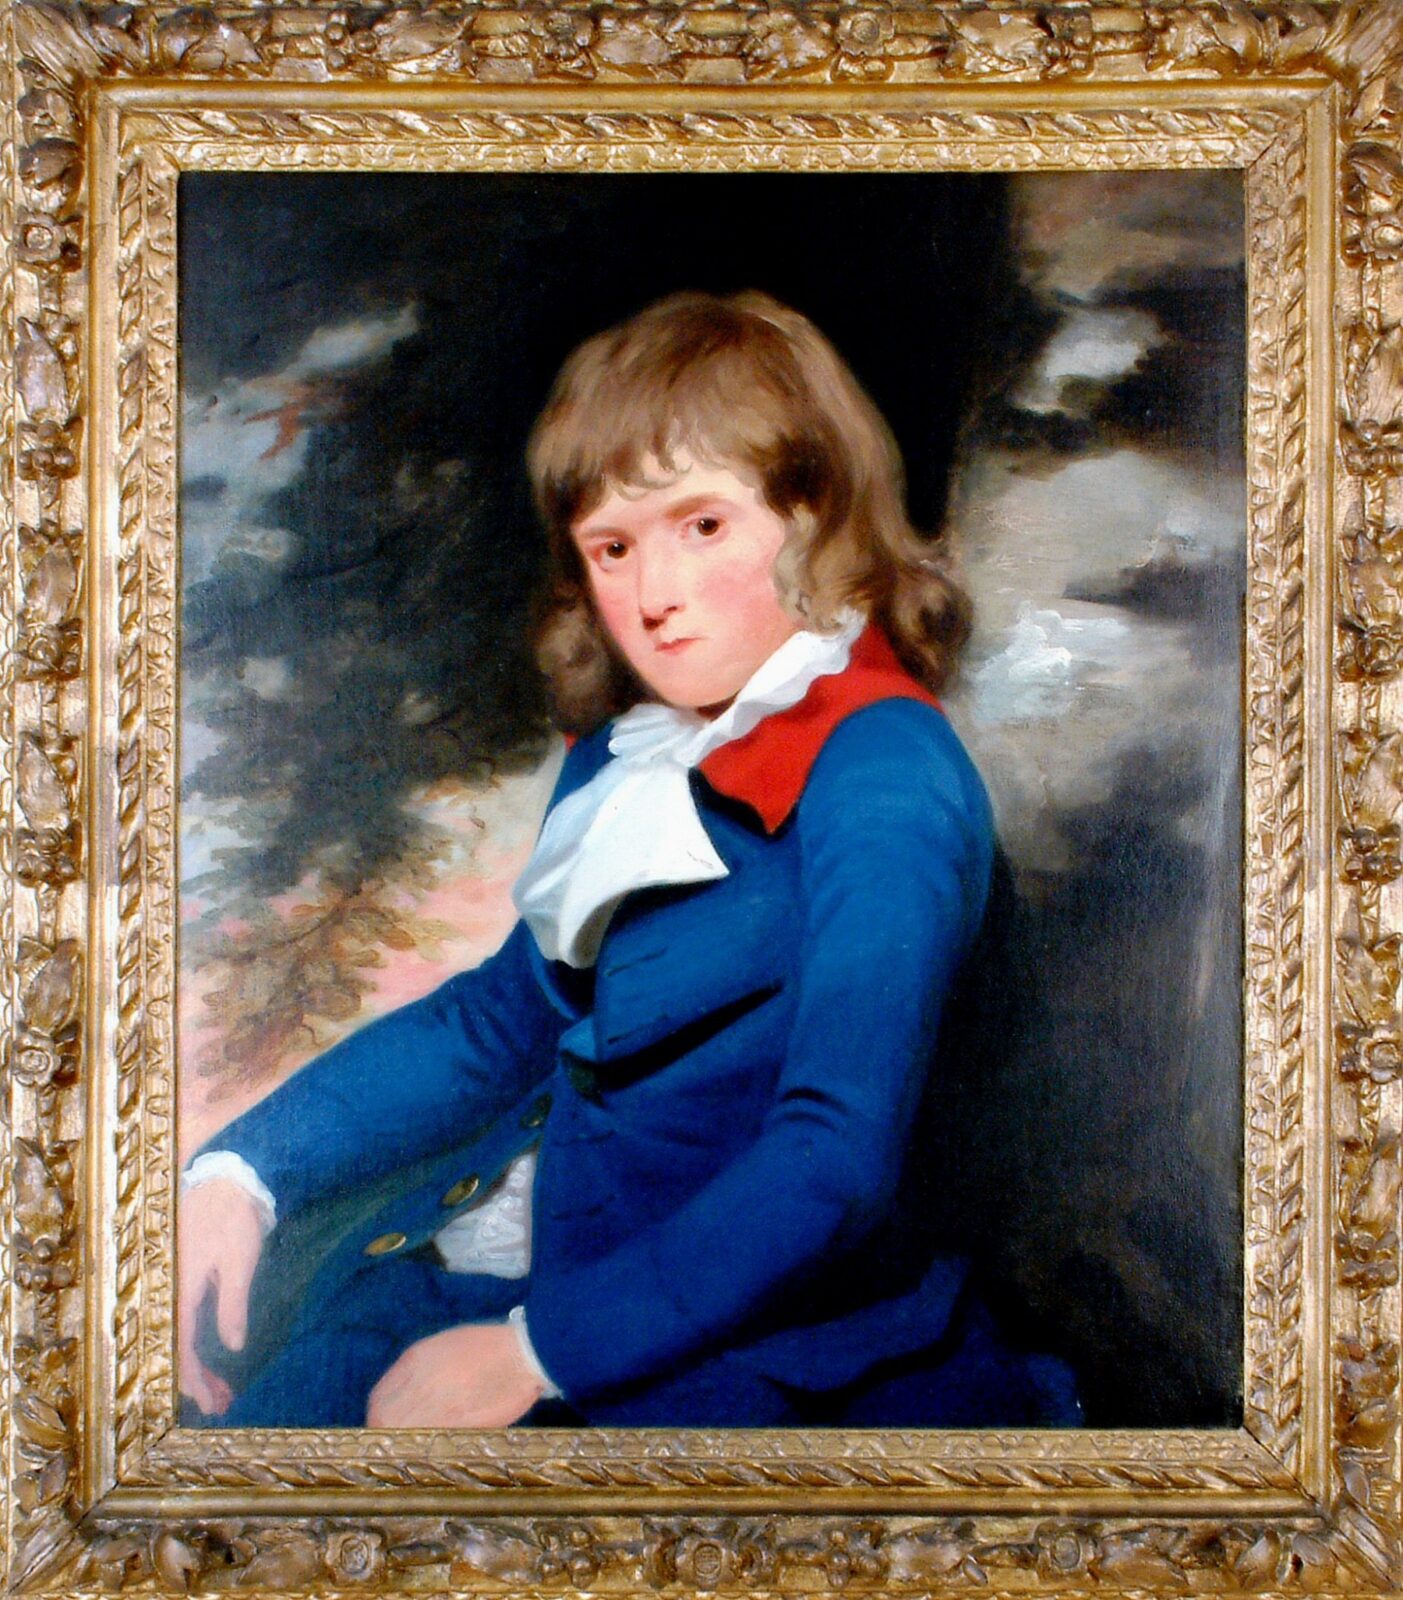 Painting Edward Austen (later Knight), as a boy.